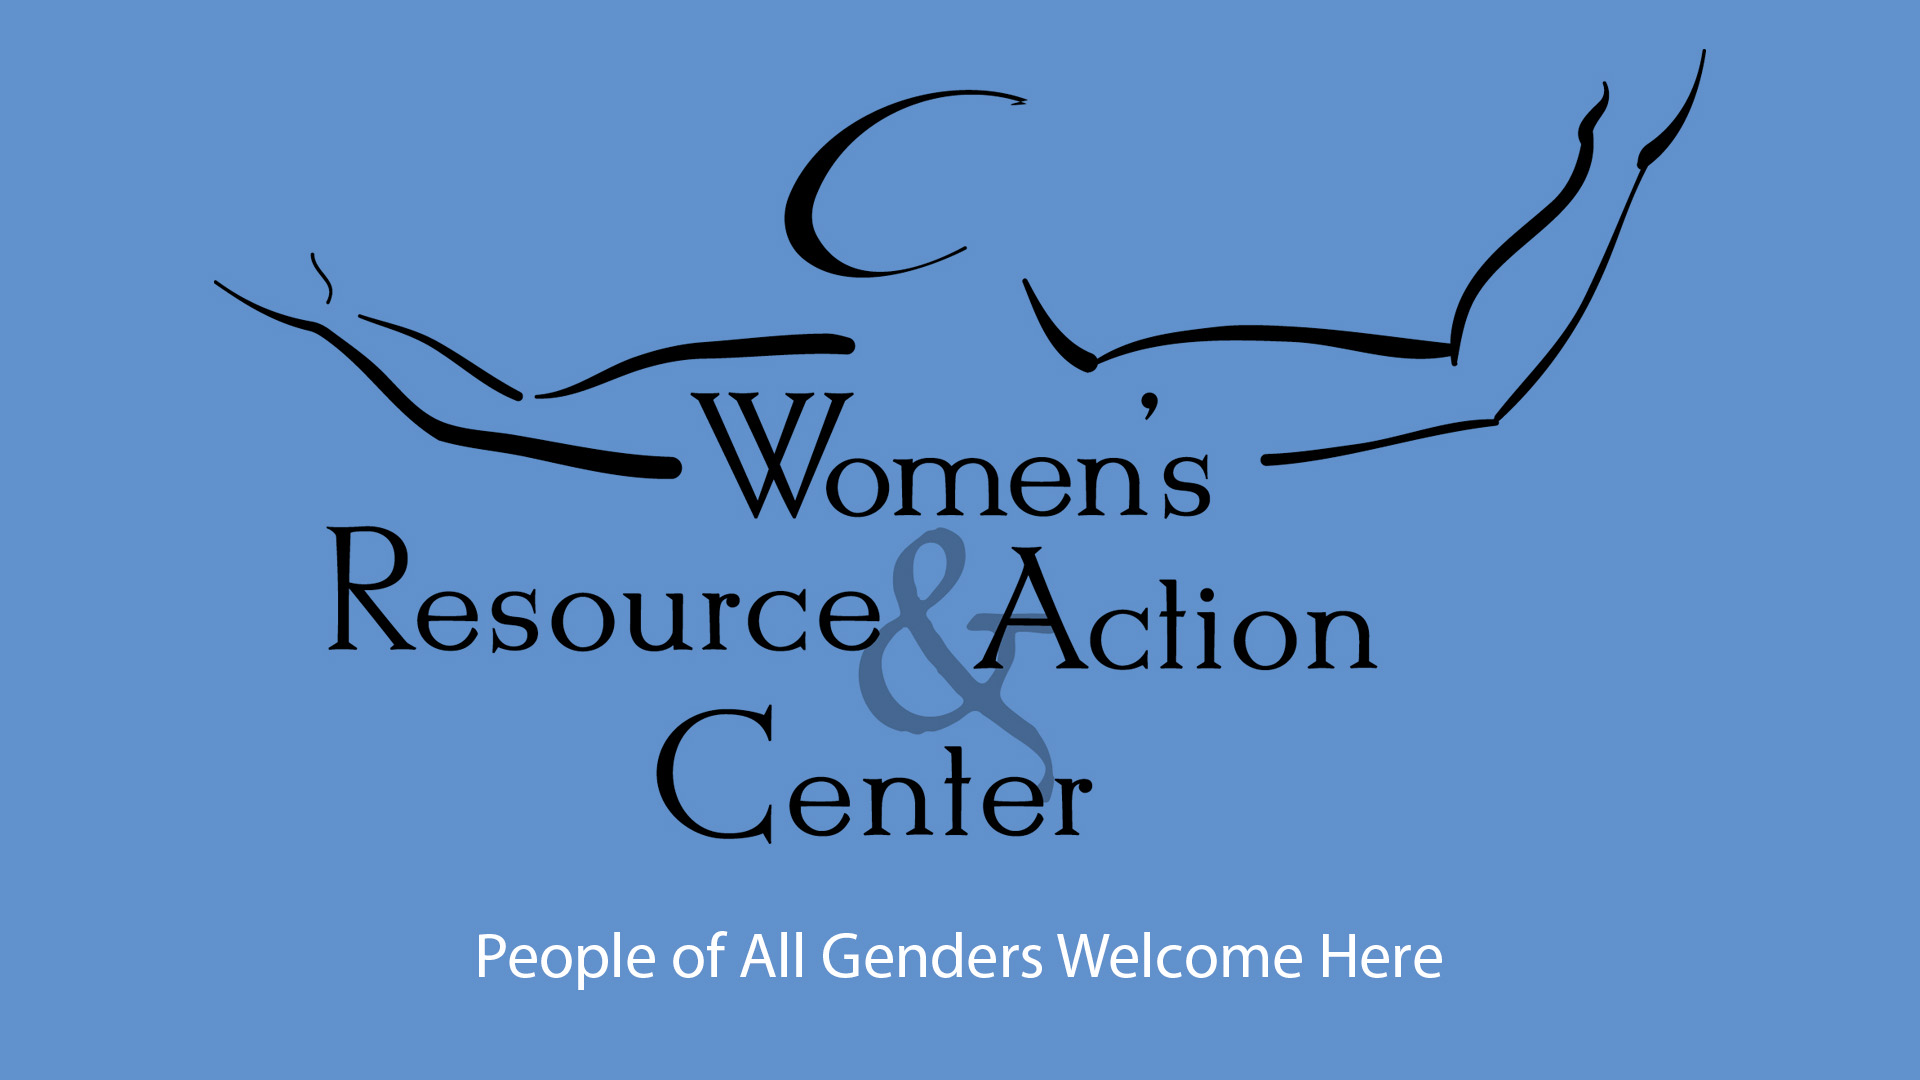 Women's Resource and Action Center • All Genders Welcome Here